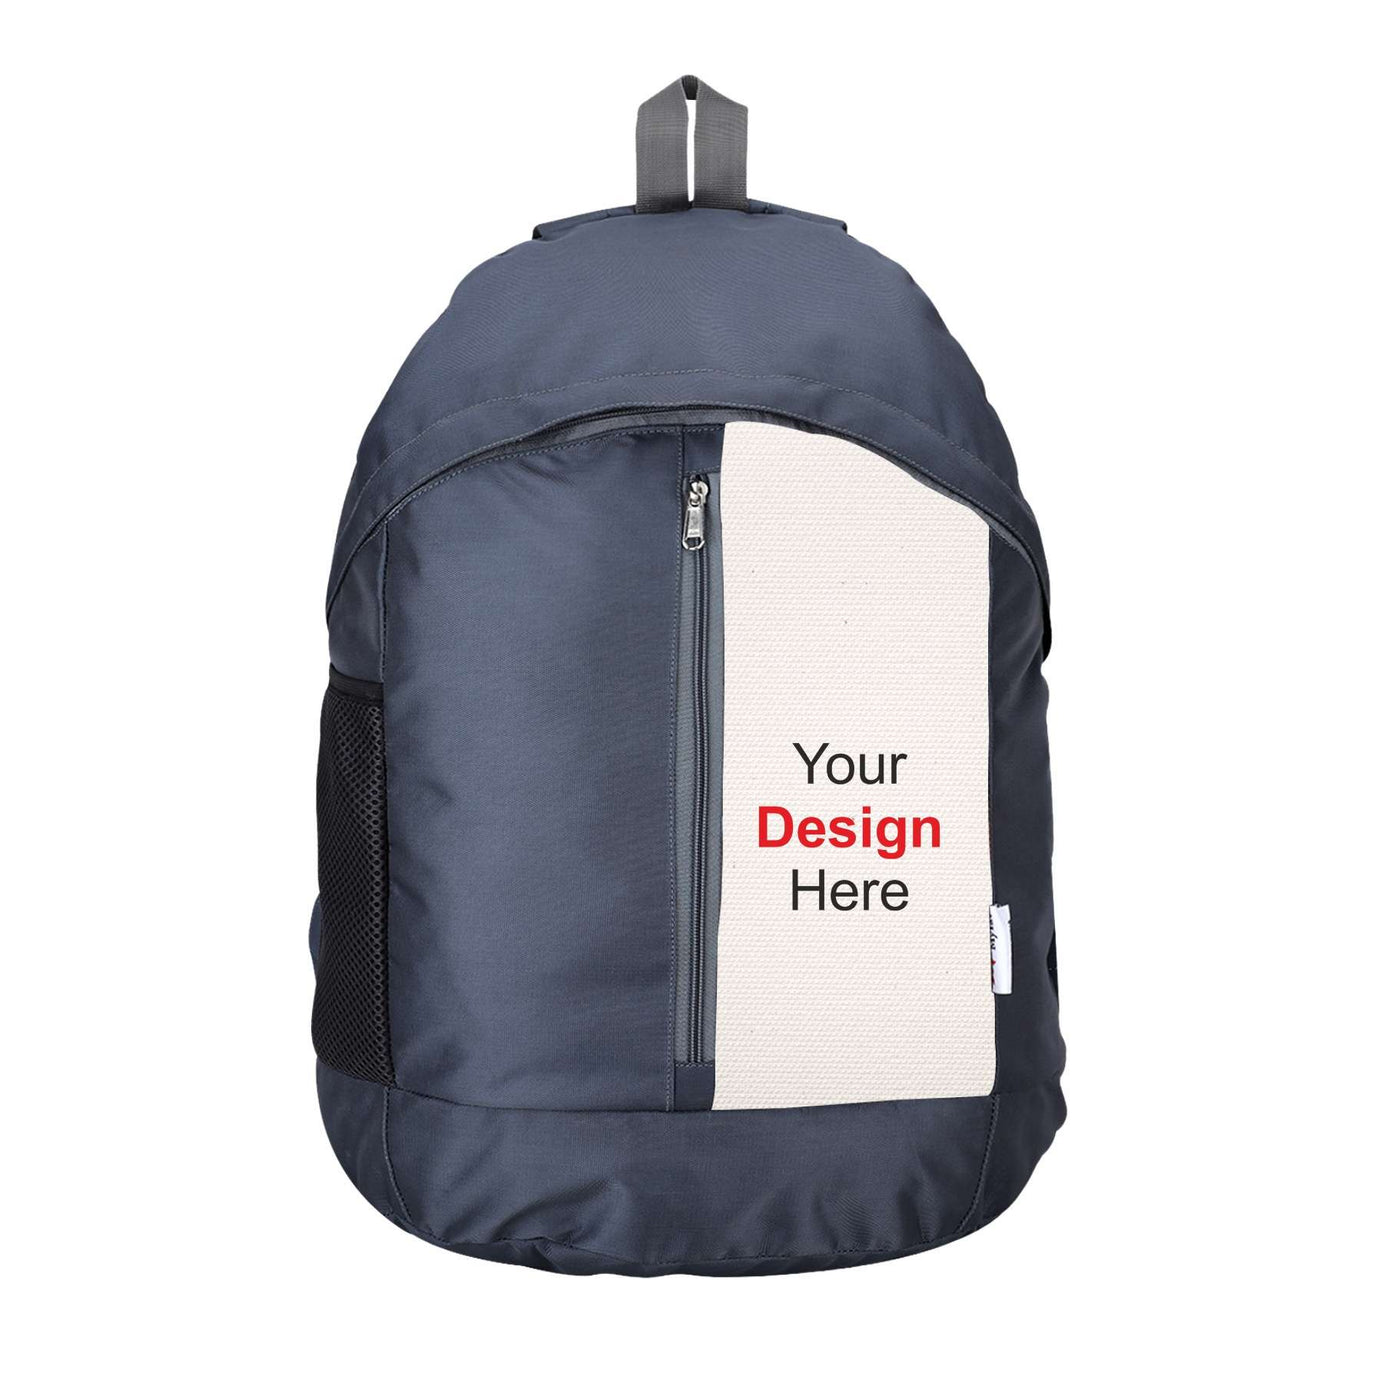 My Fav Personalized/ Customized Print 21 L Grey Colour Laptop Backpack for Men Women / College Bag for Boys Girls / Office Bag